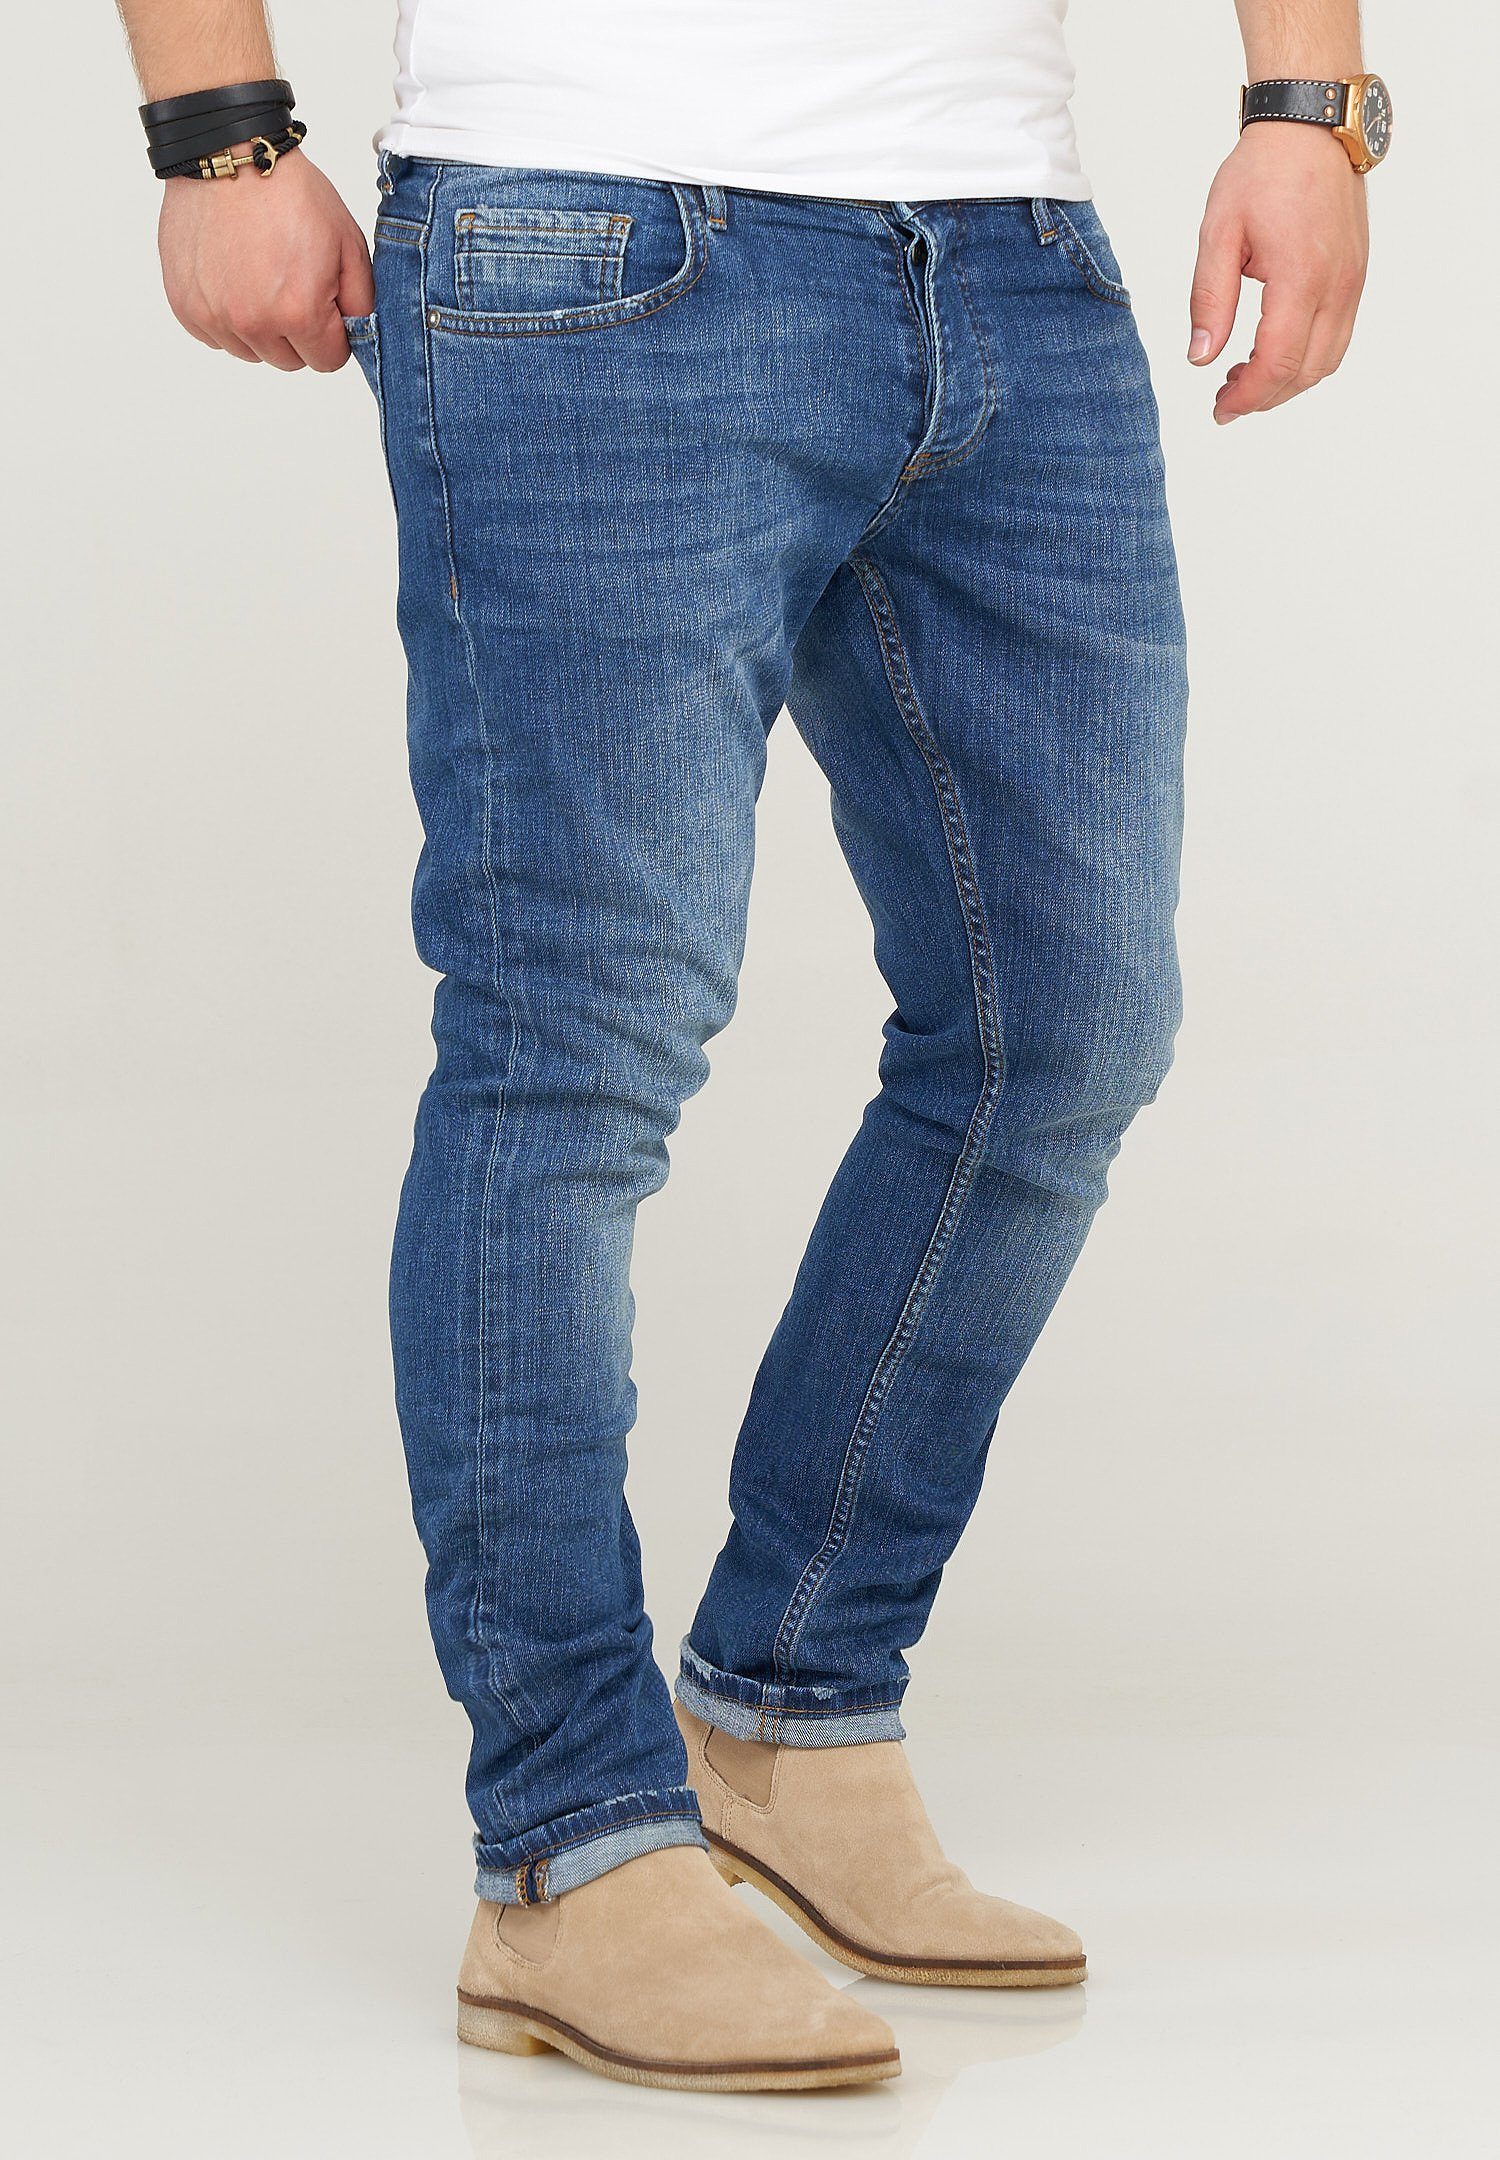 Rello & Reese Slim-fit-Jeans R&RELY Stone-Washed Dunkelblau